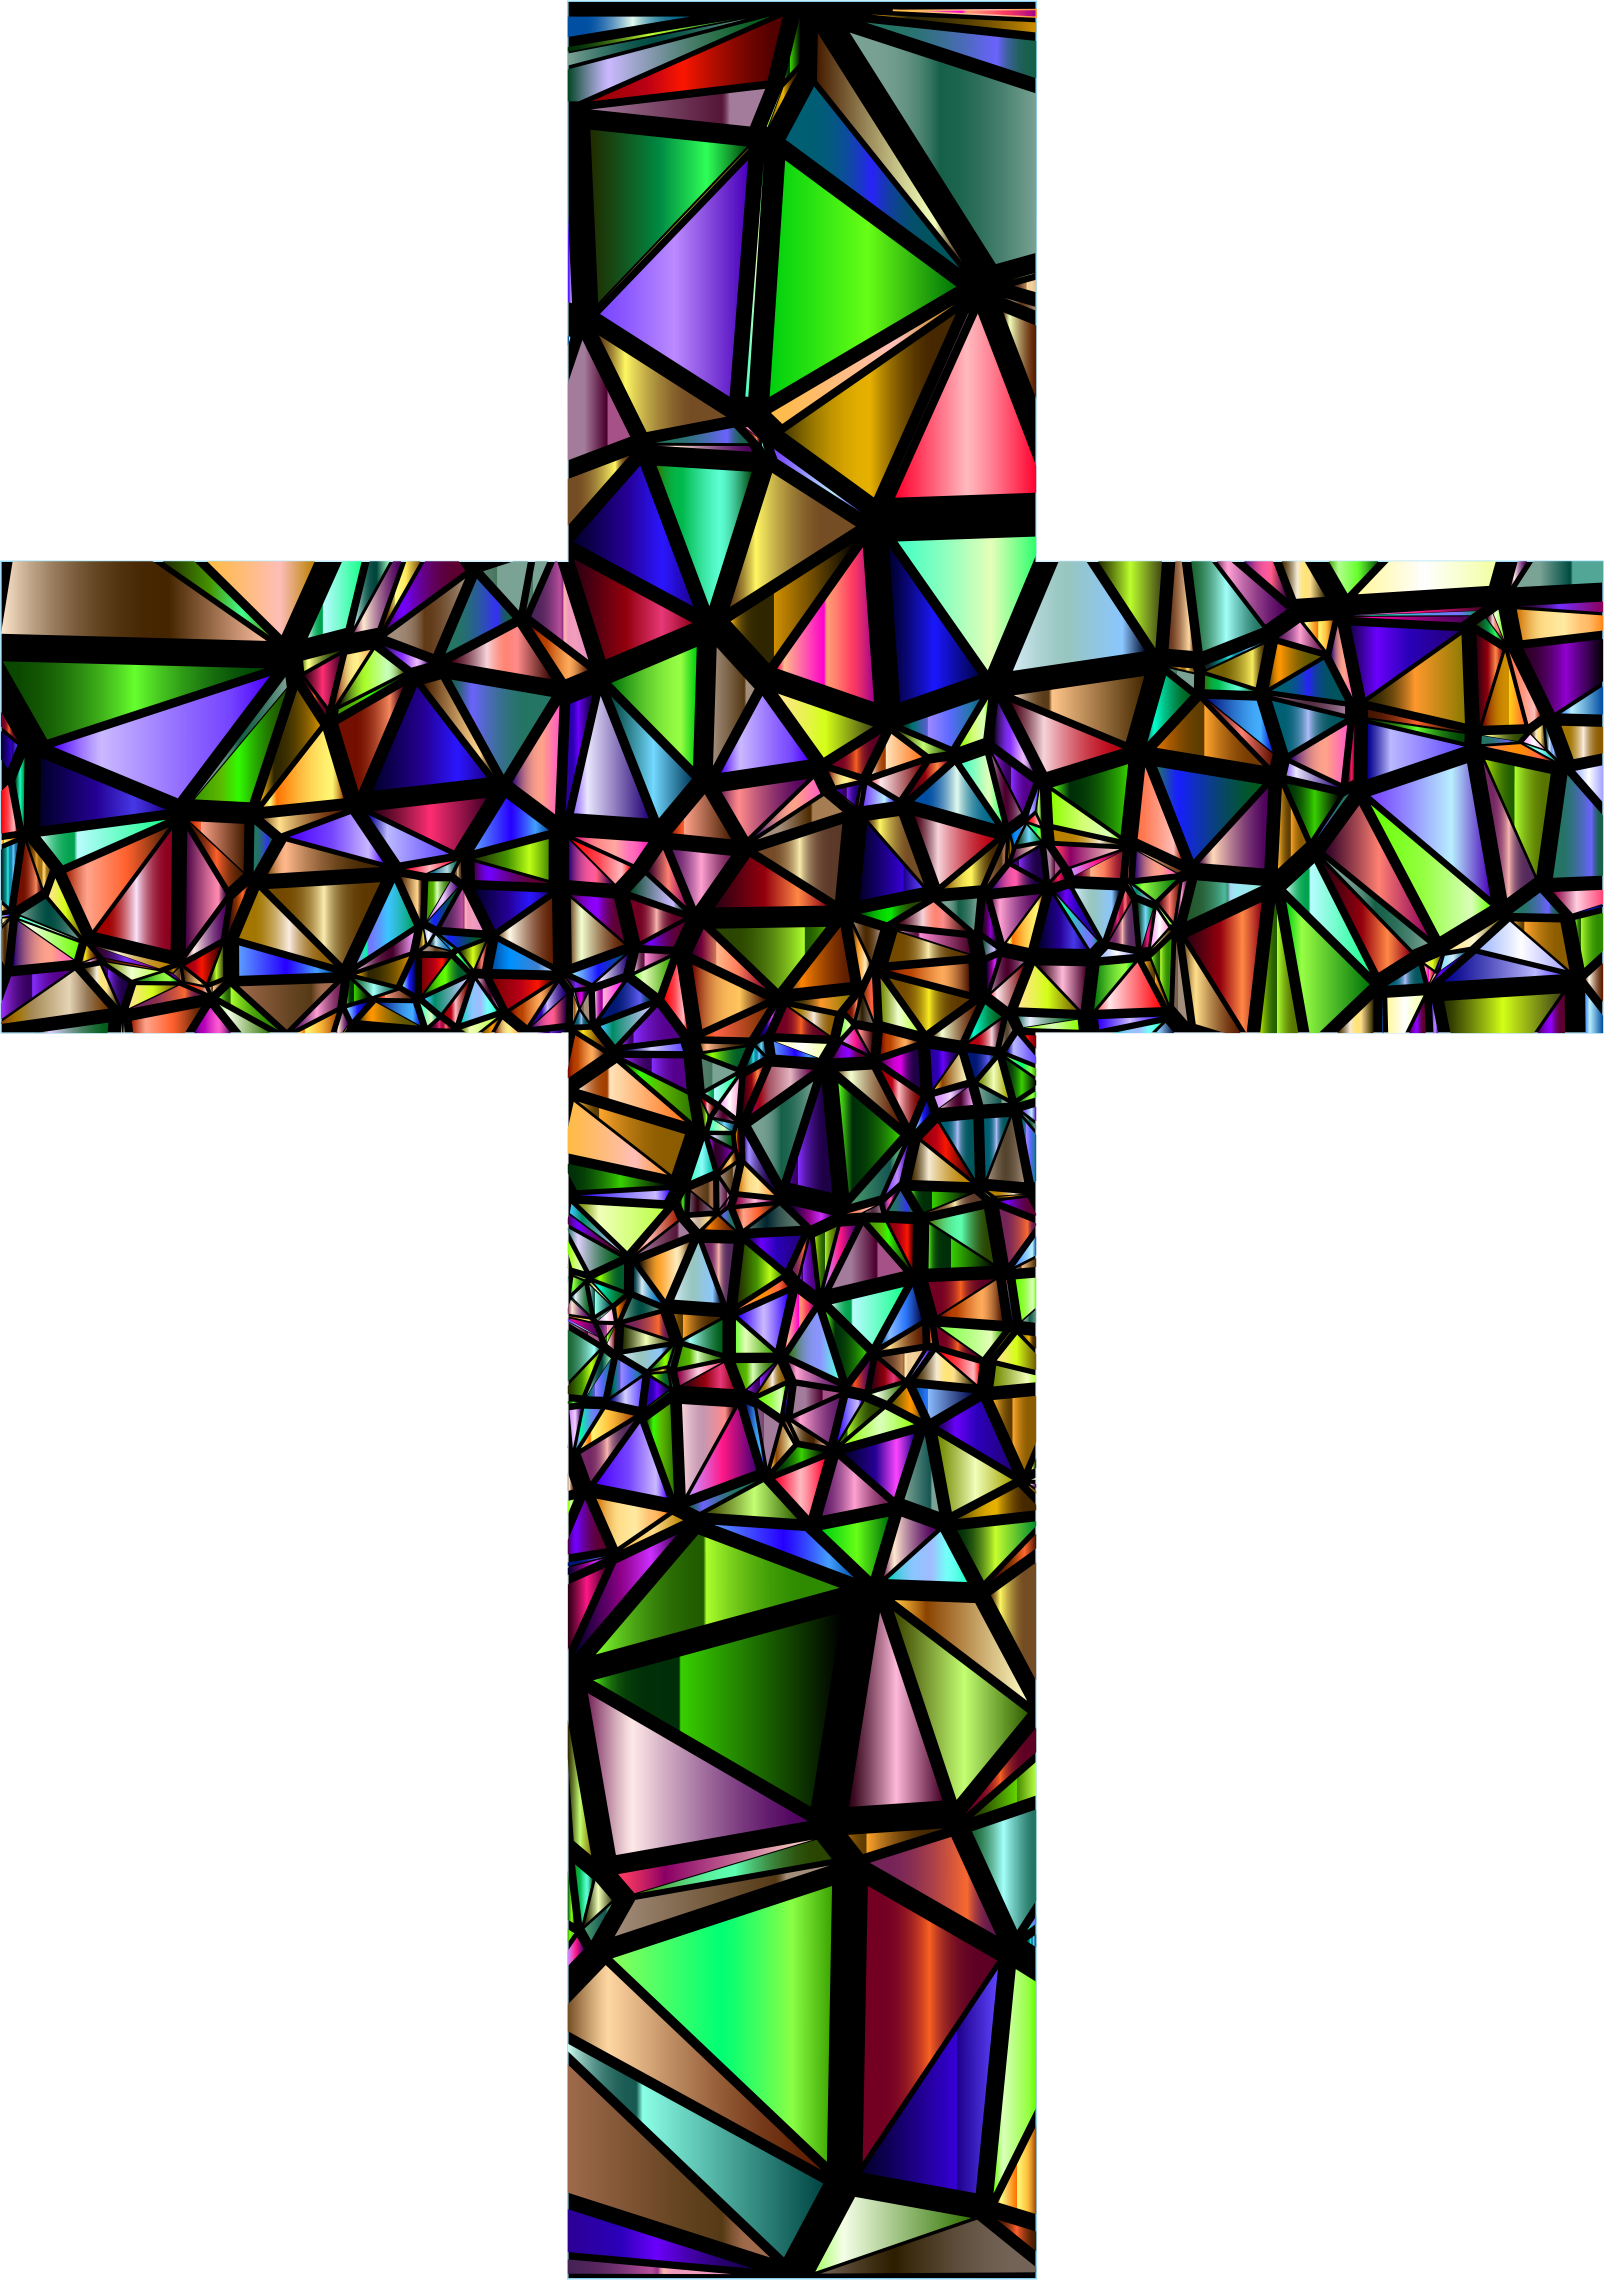 Big Image - Cross In Stained Glass Windows (1604x2280)